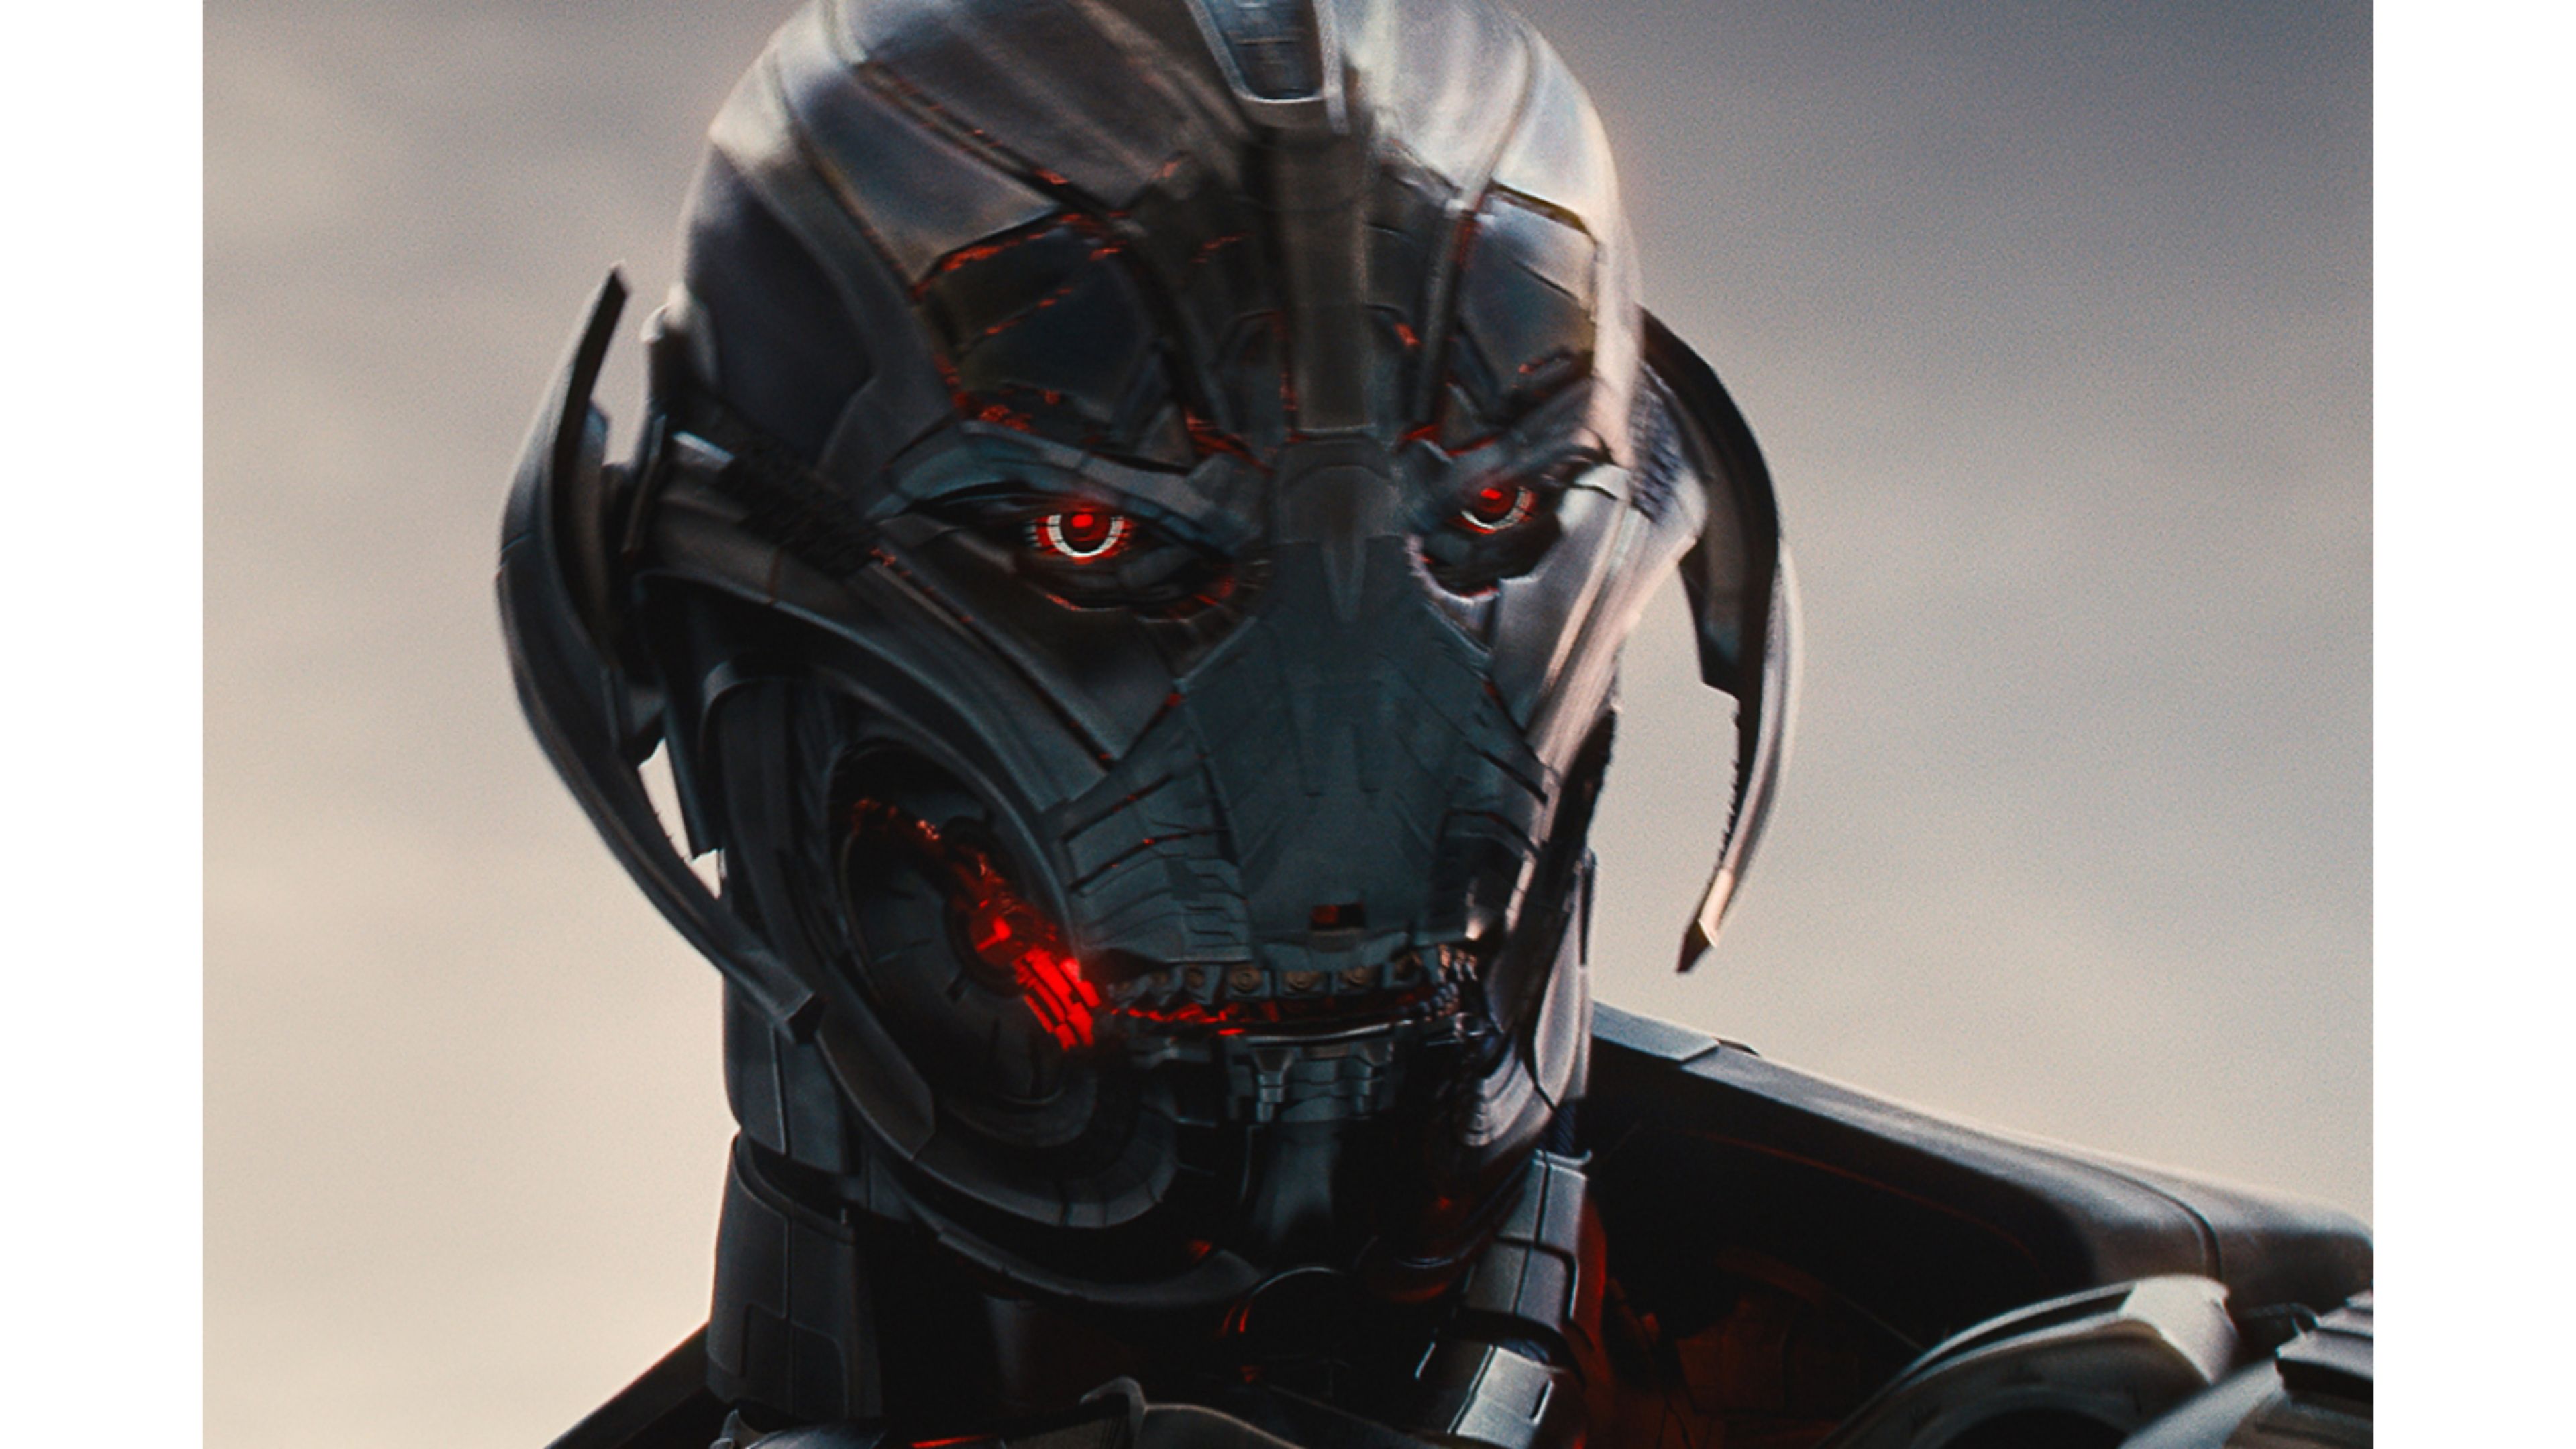 Ultron 4K wallpapers for your desktop or mobile screen free and